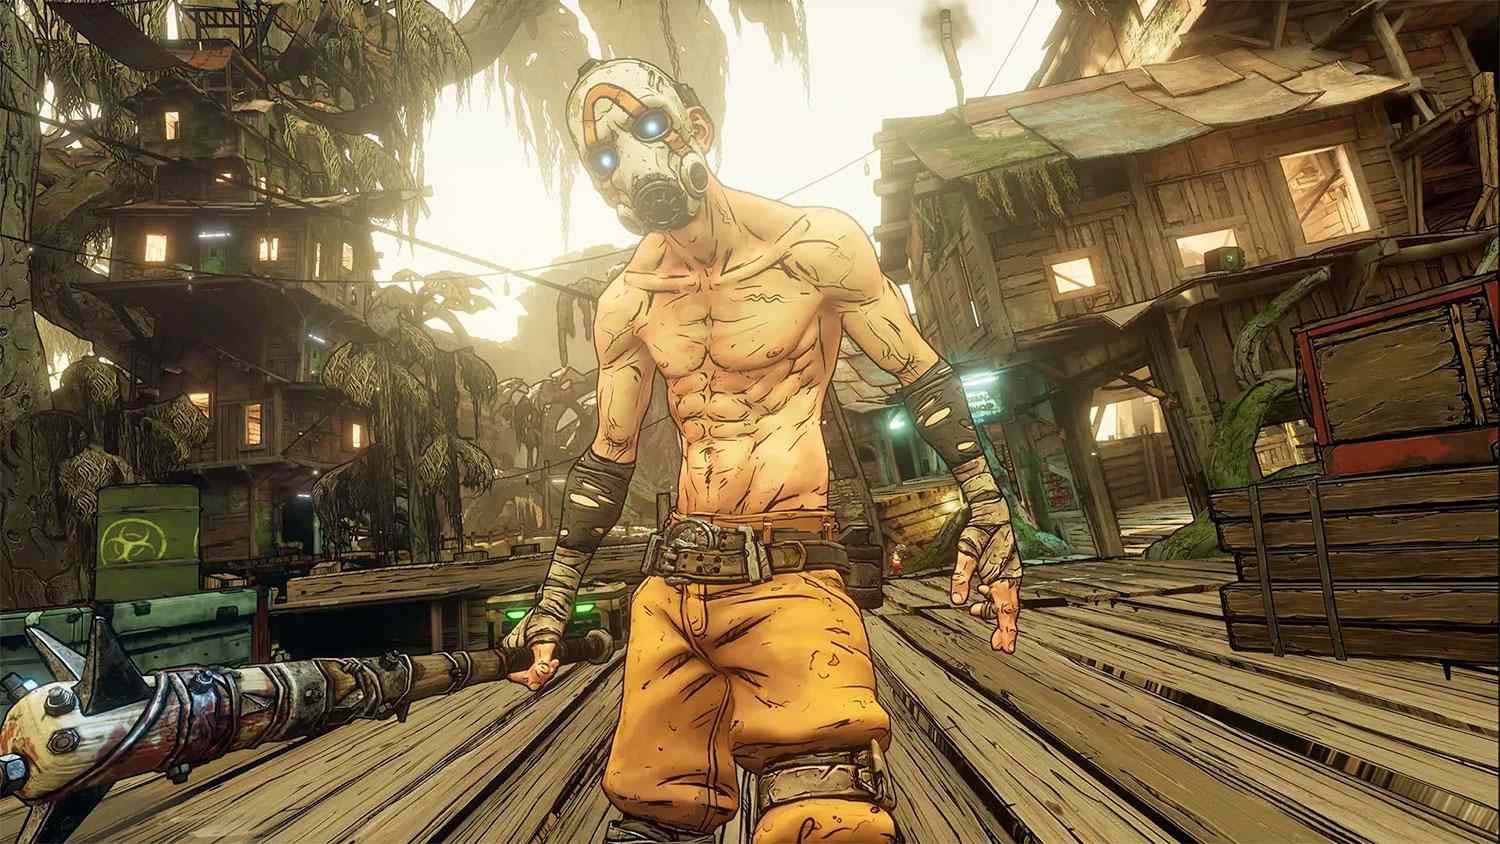 What do we know about the Borderlands movie?